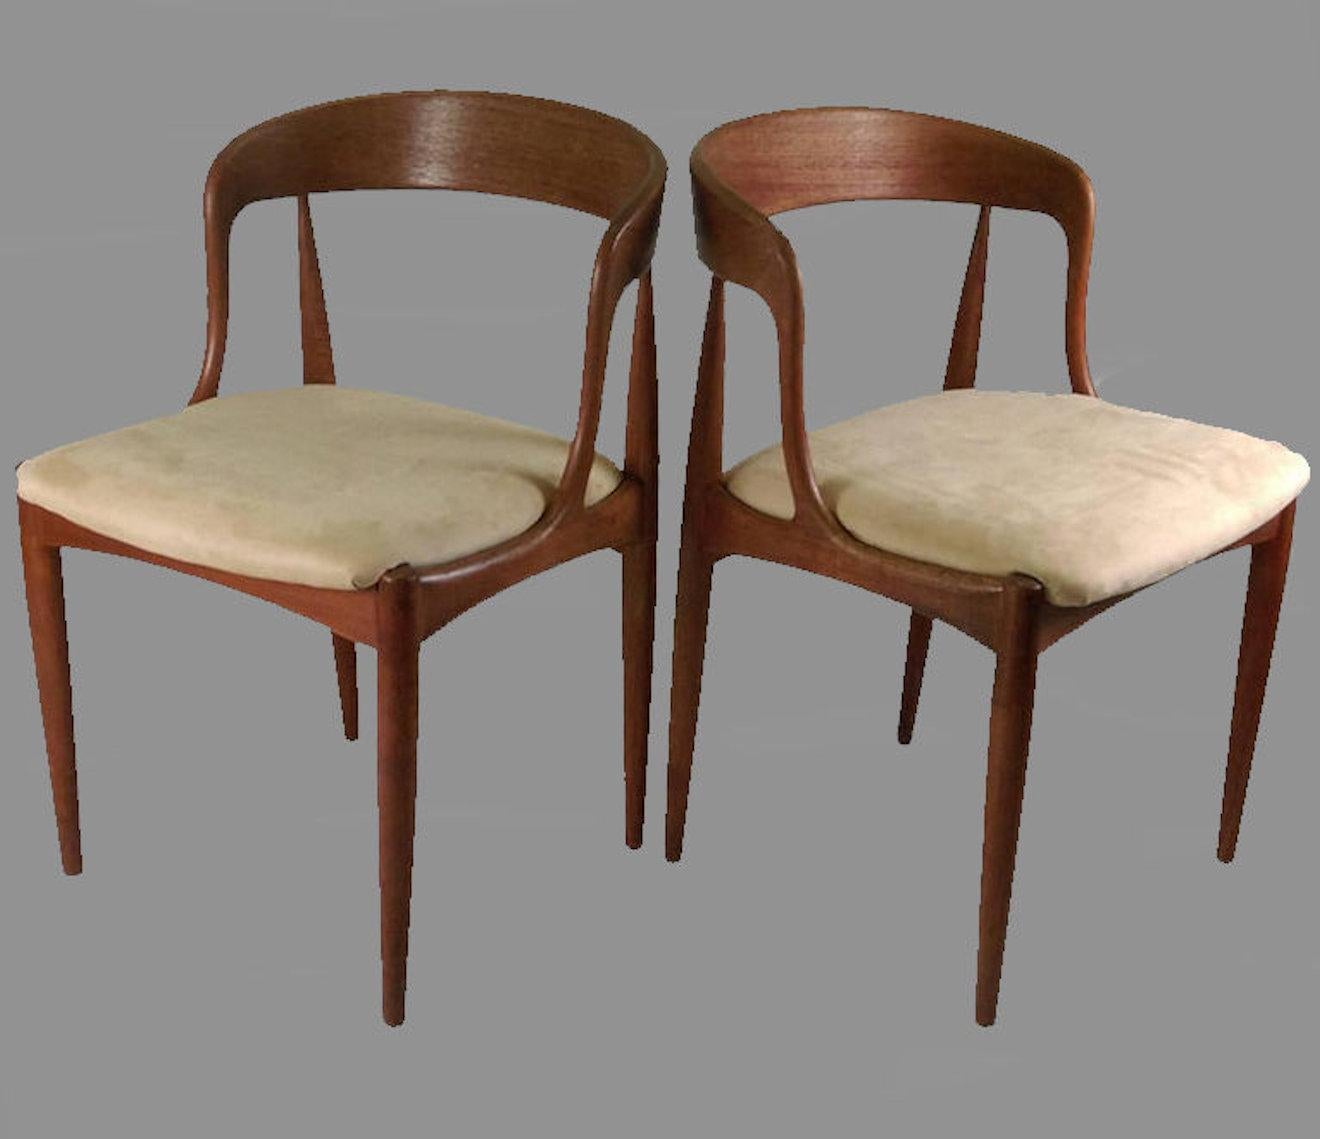 Set of six restored Johannes Andersen dining chairs in teak inc. reupholstery designed for Ørum Møbelfabrik in 1965

The chairs were designed in 19Set of six elegant organic shaped dining chairs in teak designed by the Danish designer Johannes